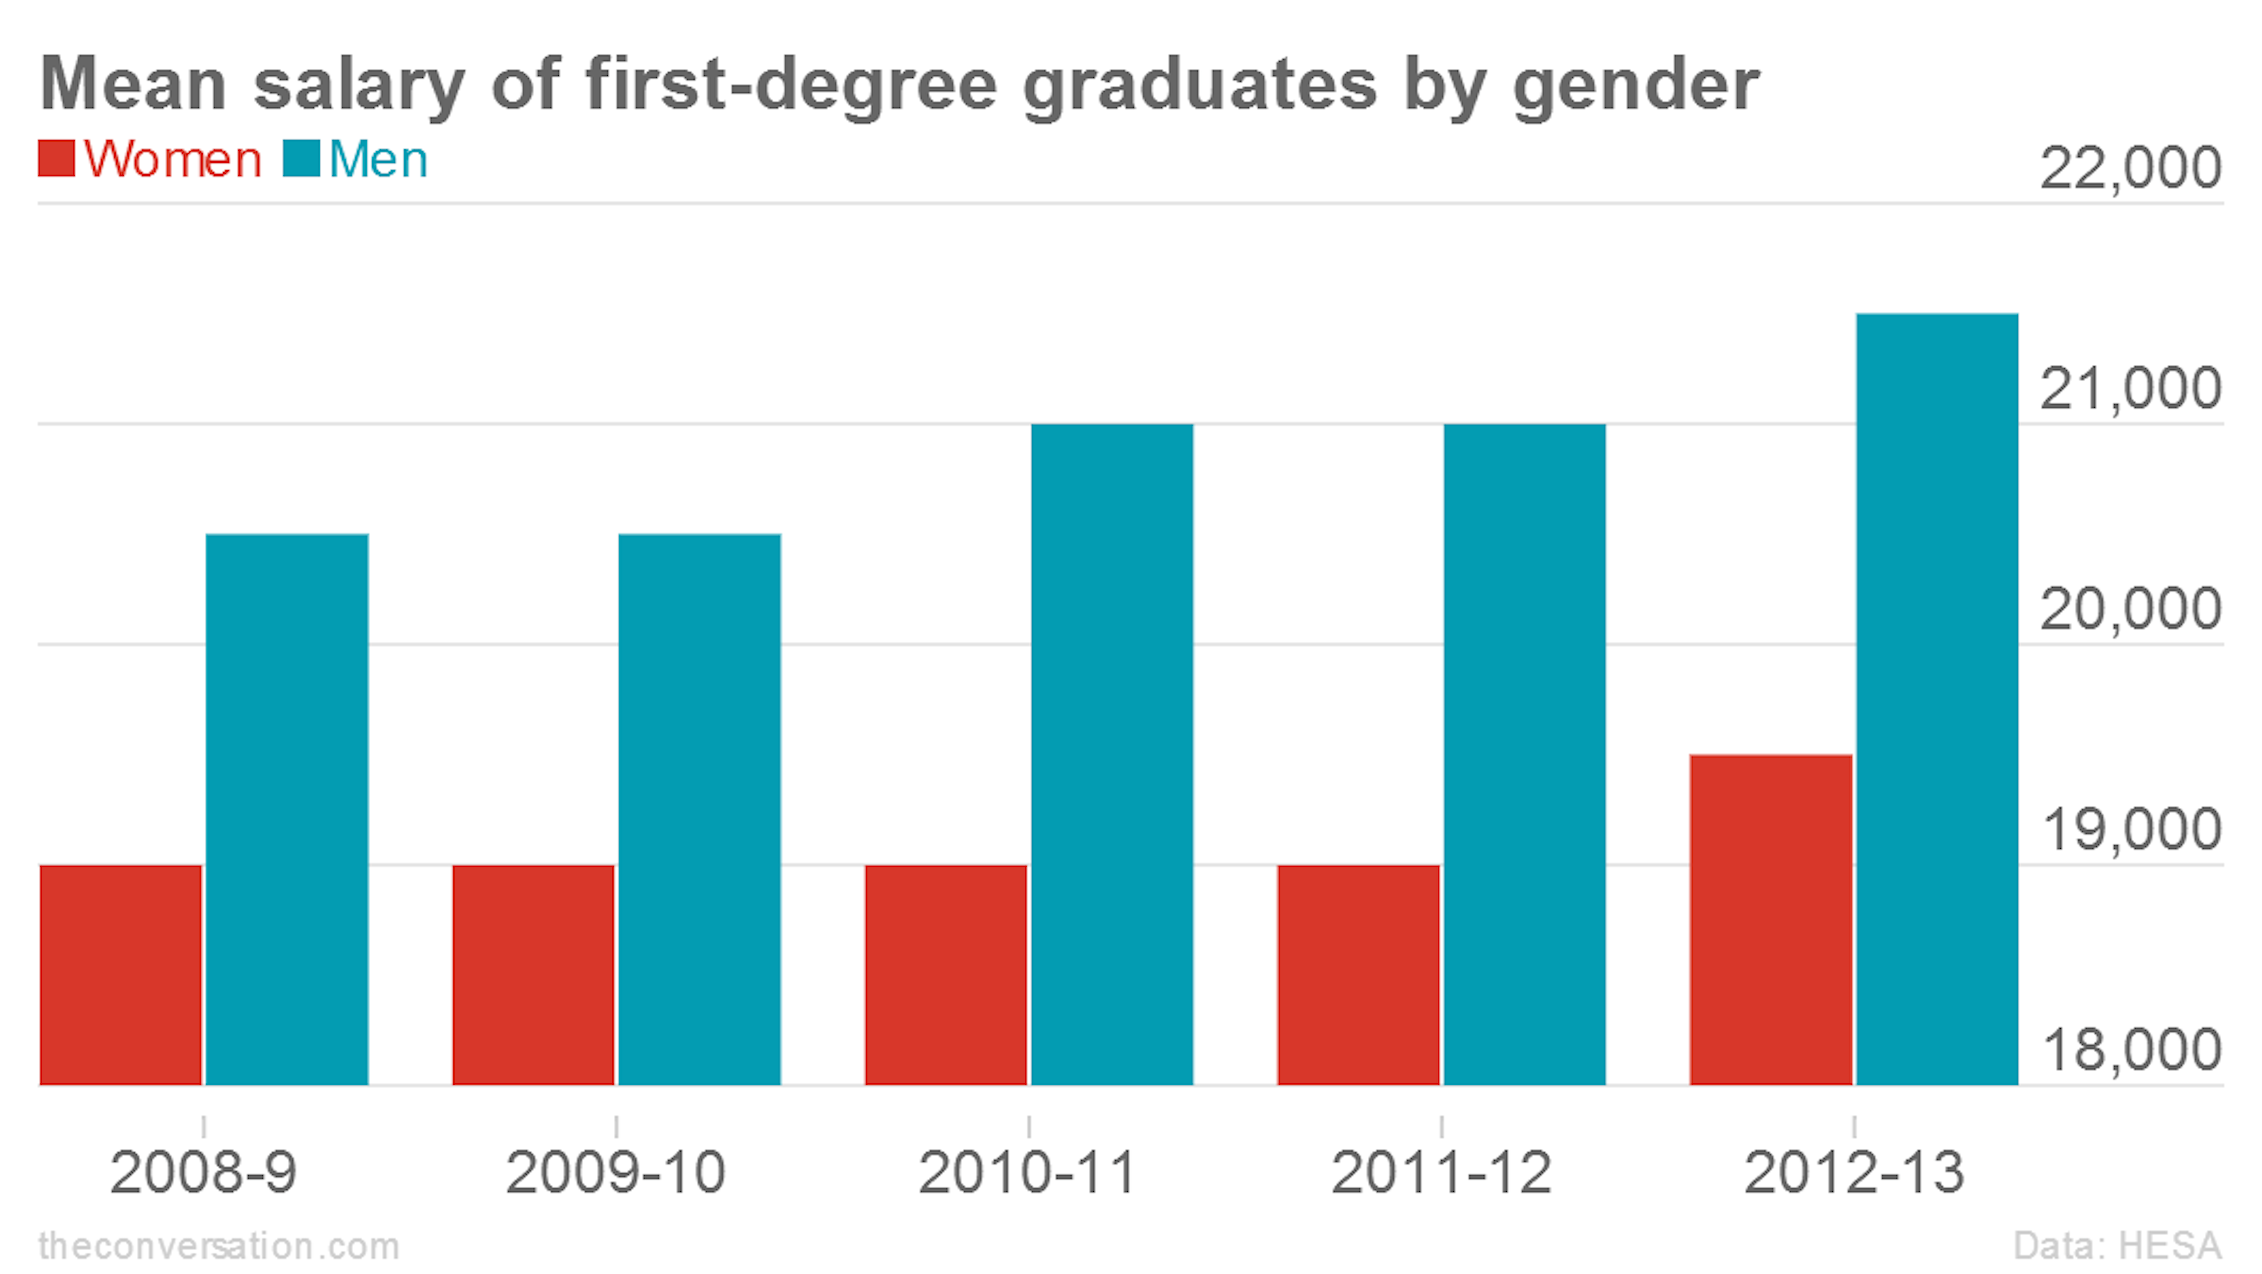 Men earn £2,000 more than women within six months of graduating